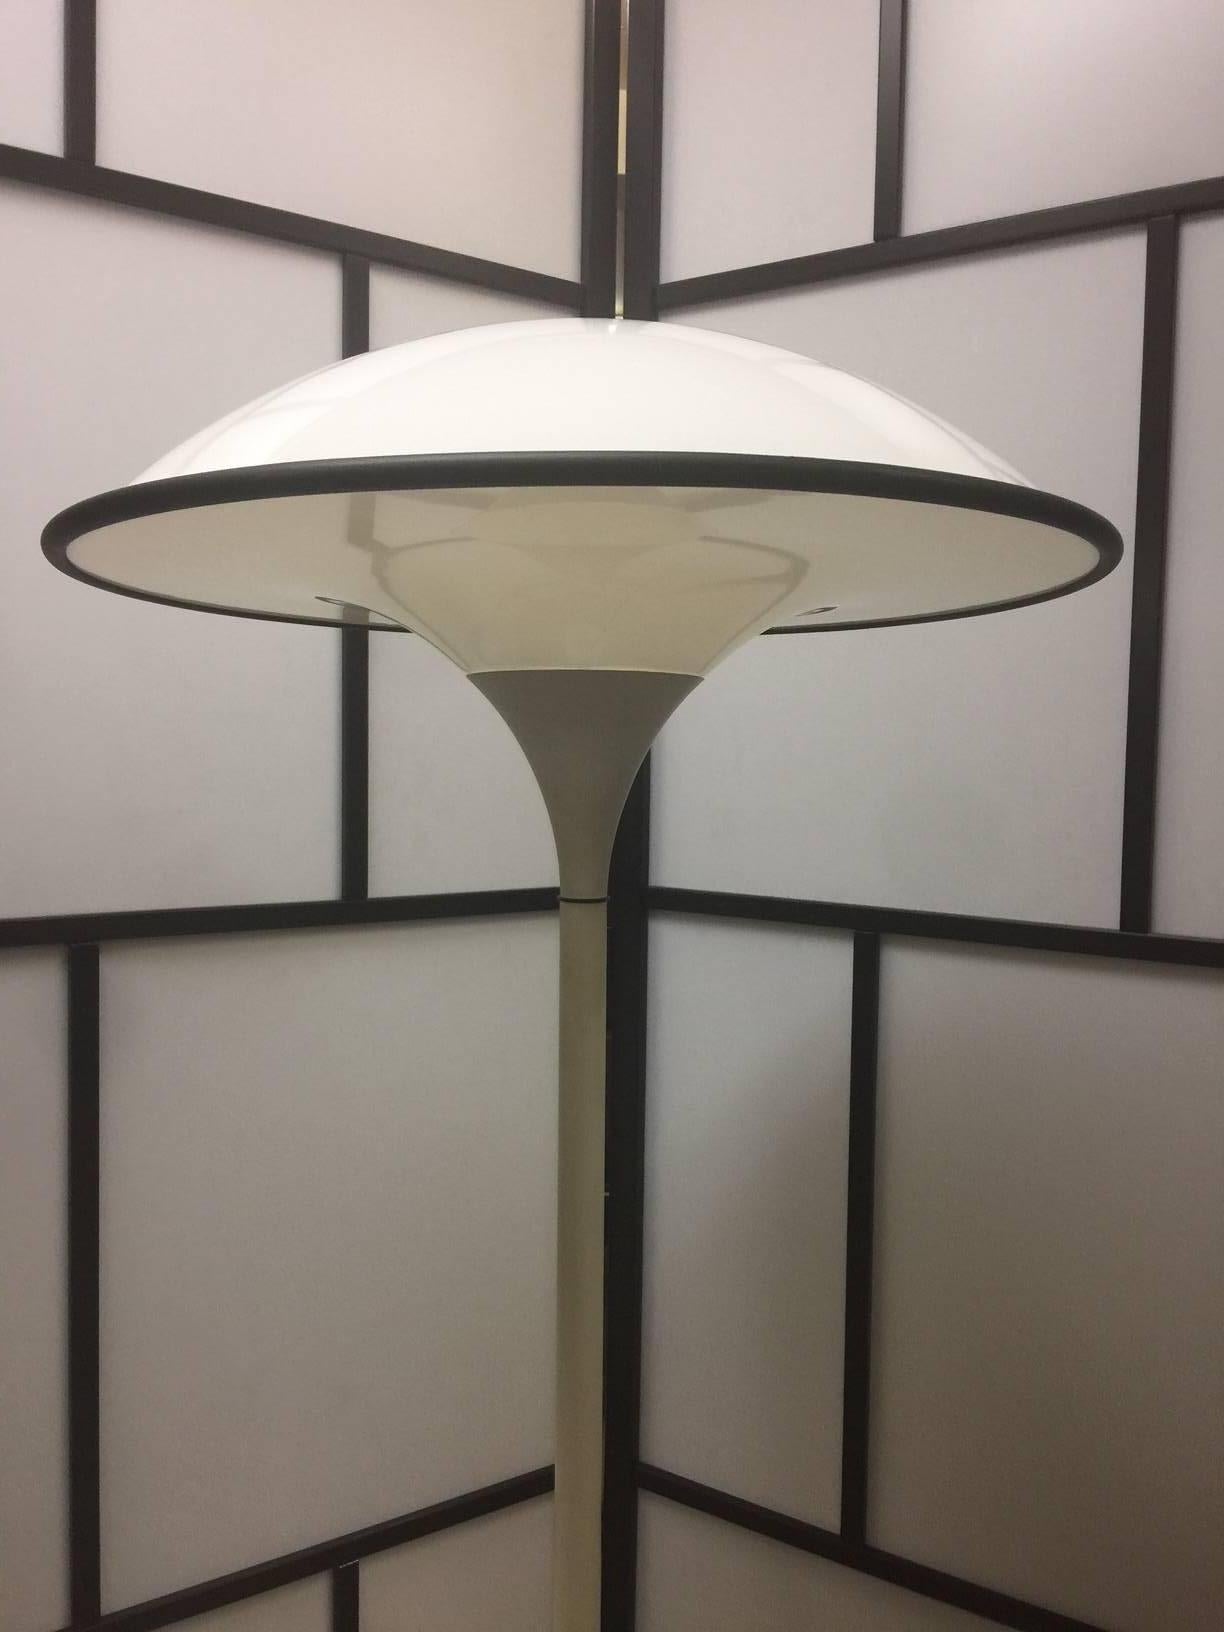 20th Century Midcentury Space Age Saucer Floor Lamp by Fog & Mørup